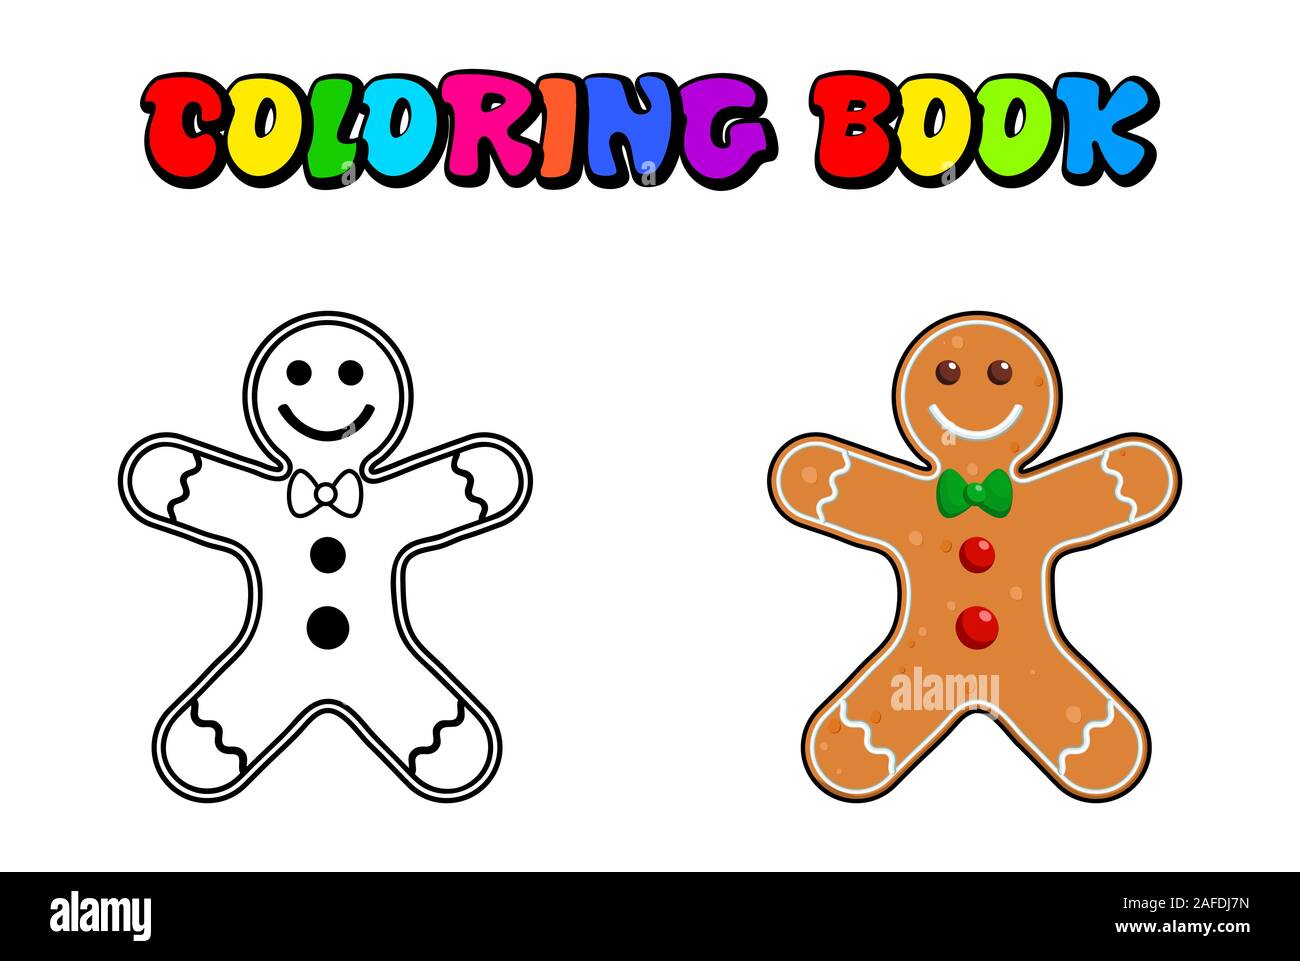 Gingerbread man coloring book, pages. Christmas baking decorated colored icing. Holiday biscuit cookies in shape of cute human. Vector illustration is Stock Vector